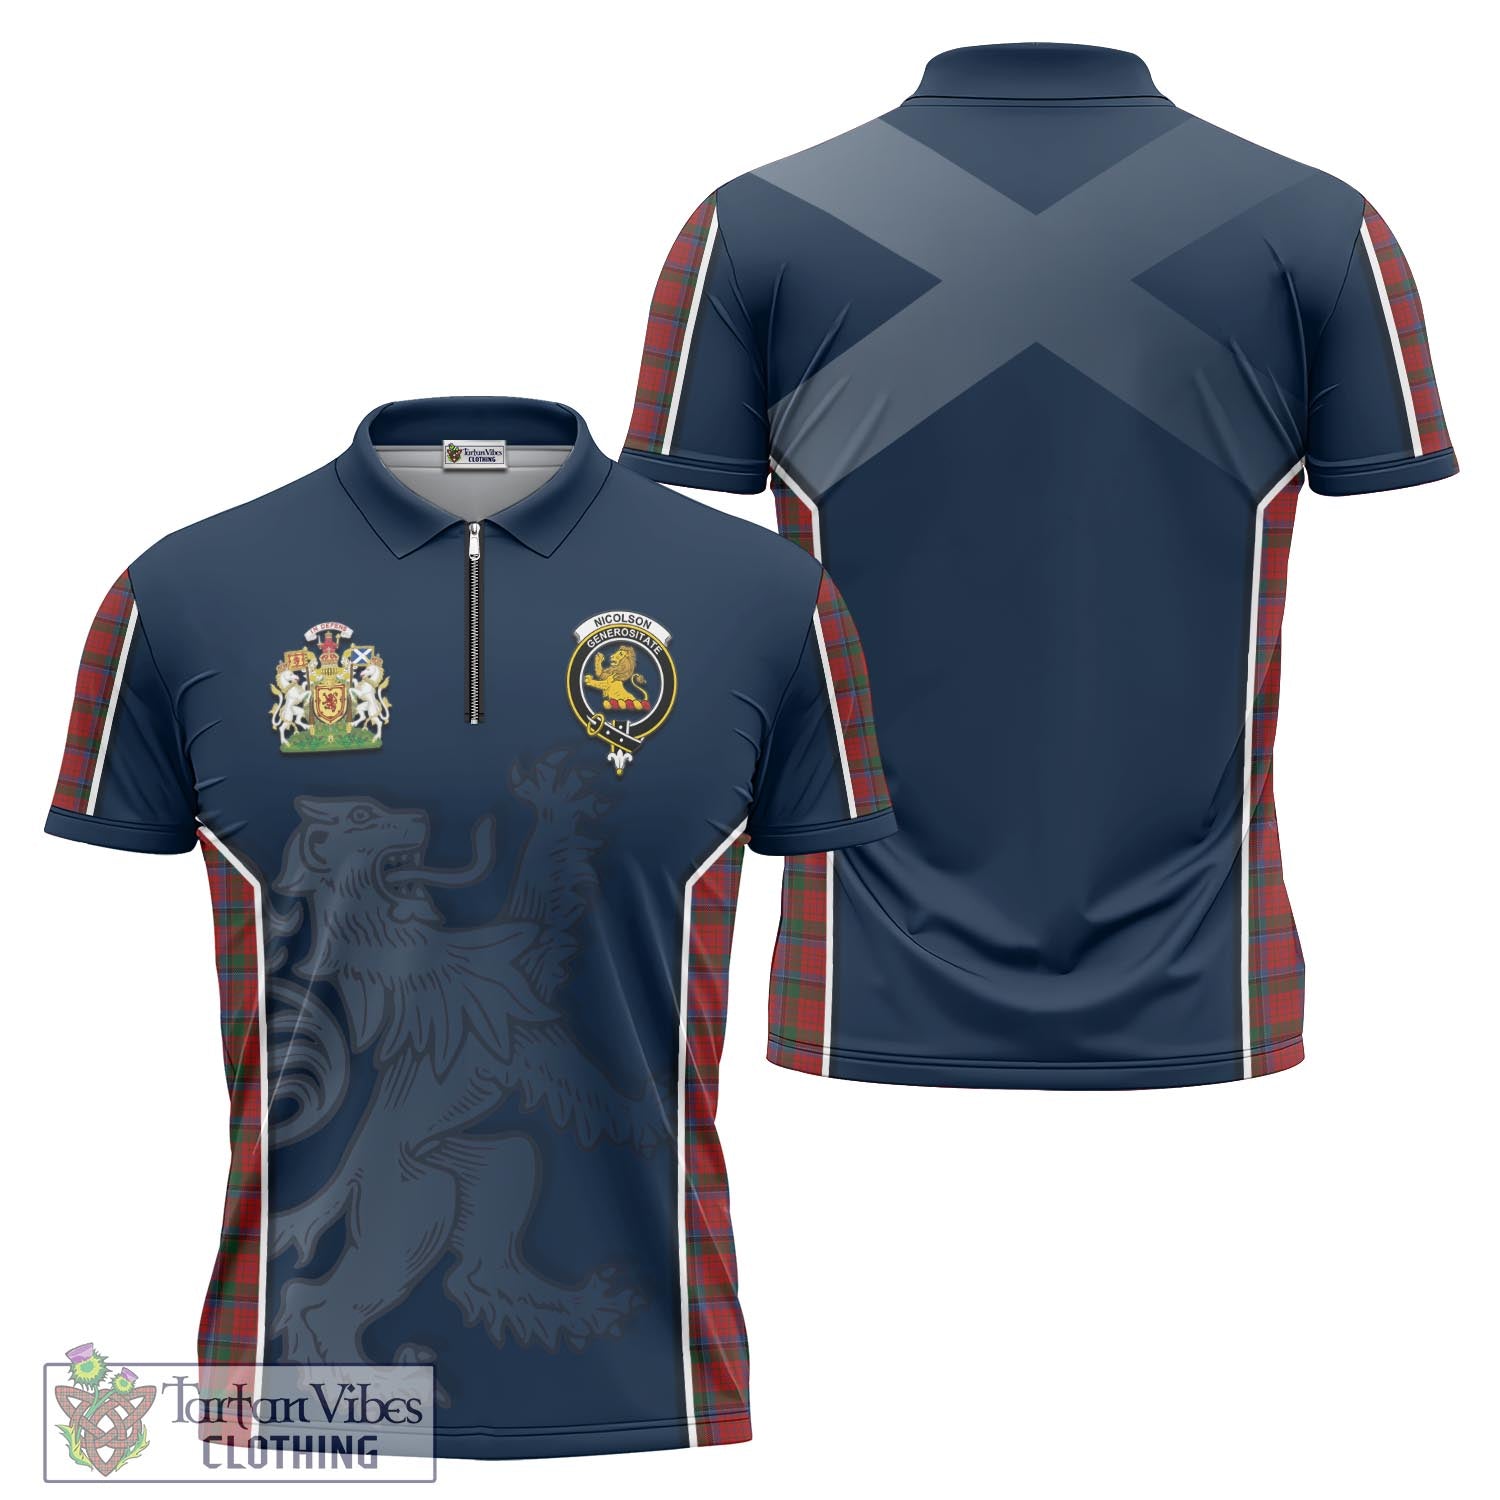 Tartan Vibes Clothing Nicolson Tartan Zipper Polo Shirt with Family Crest and Lion Rampant Vibes Sport Style